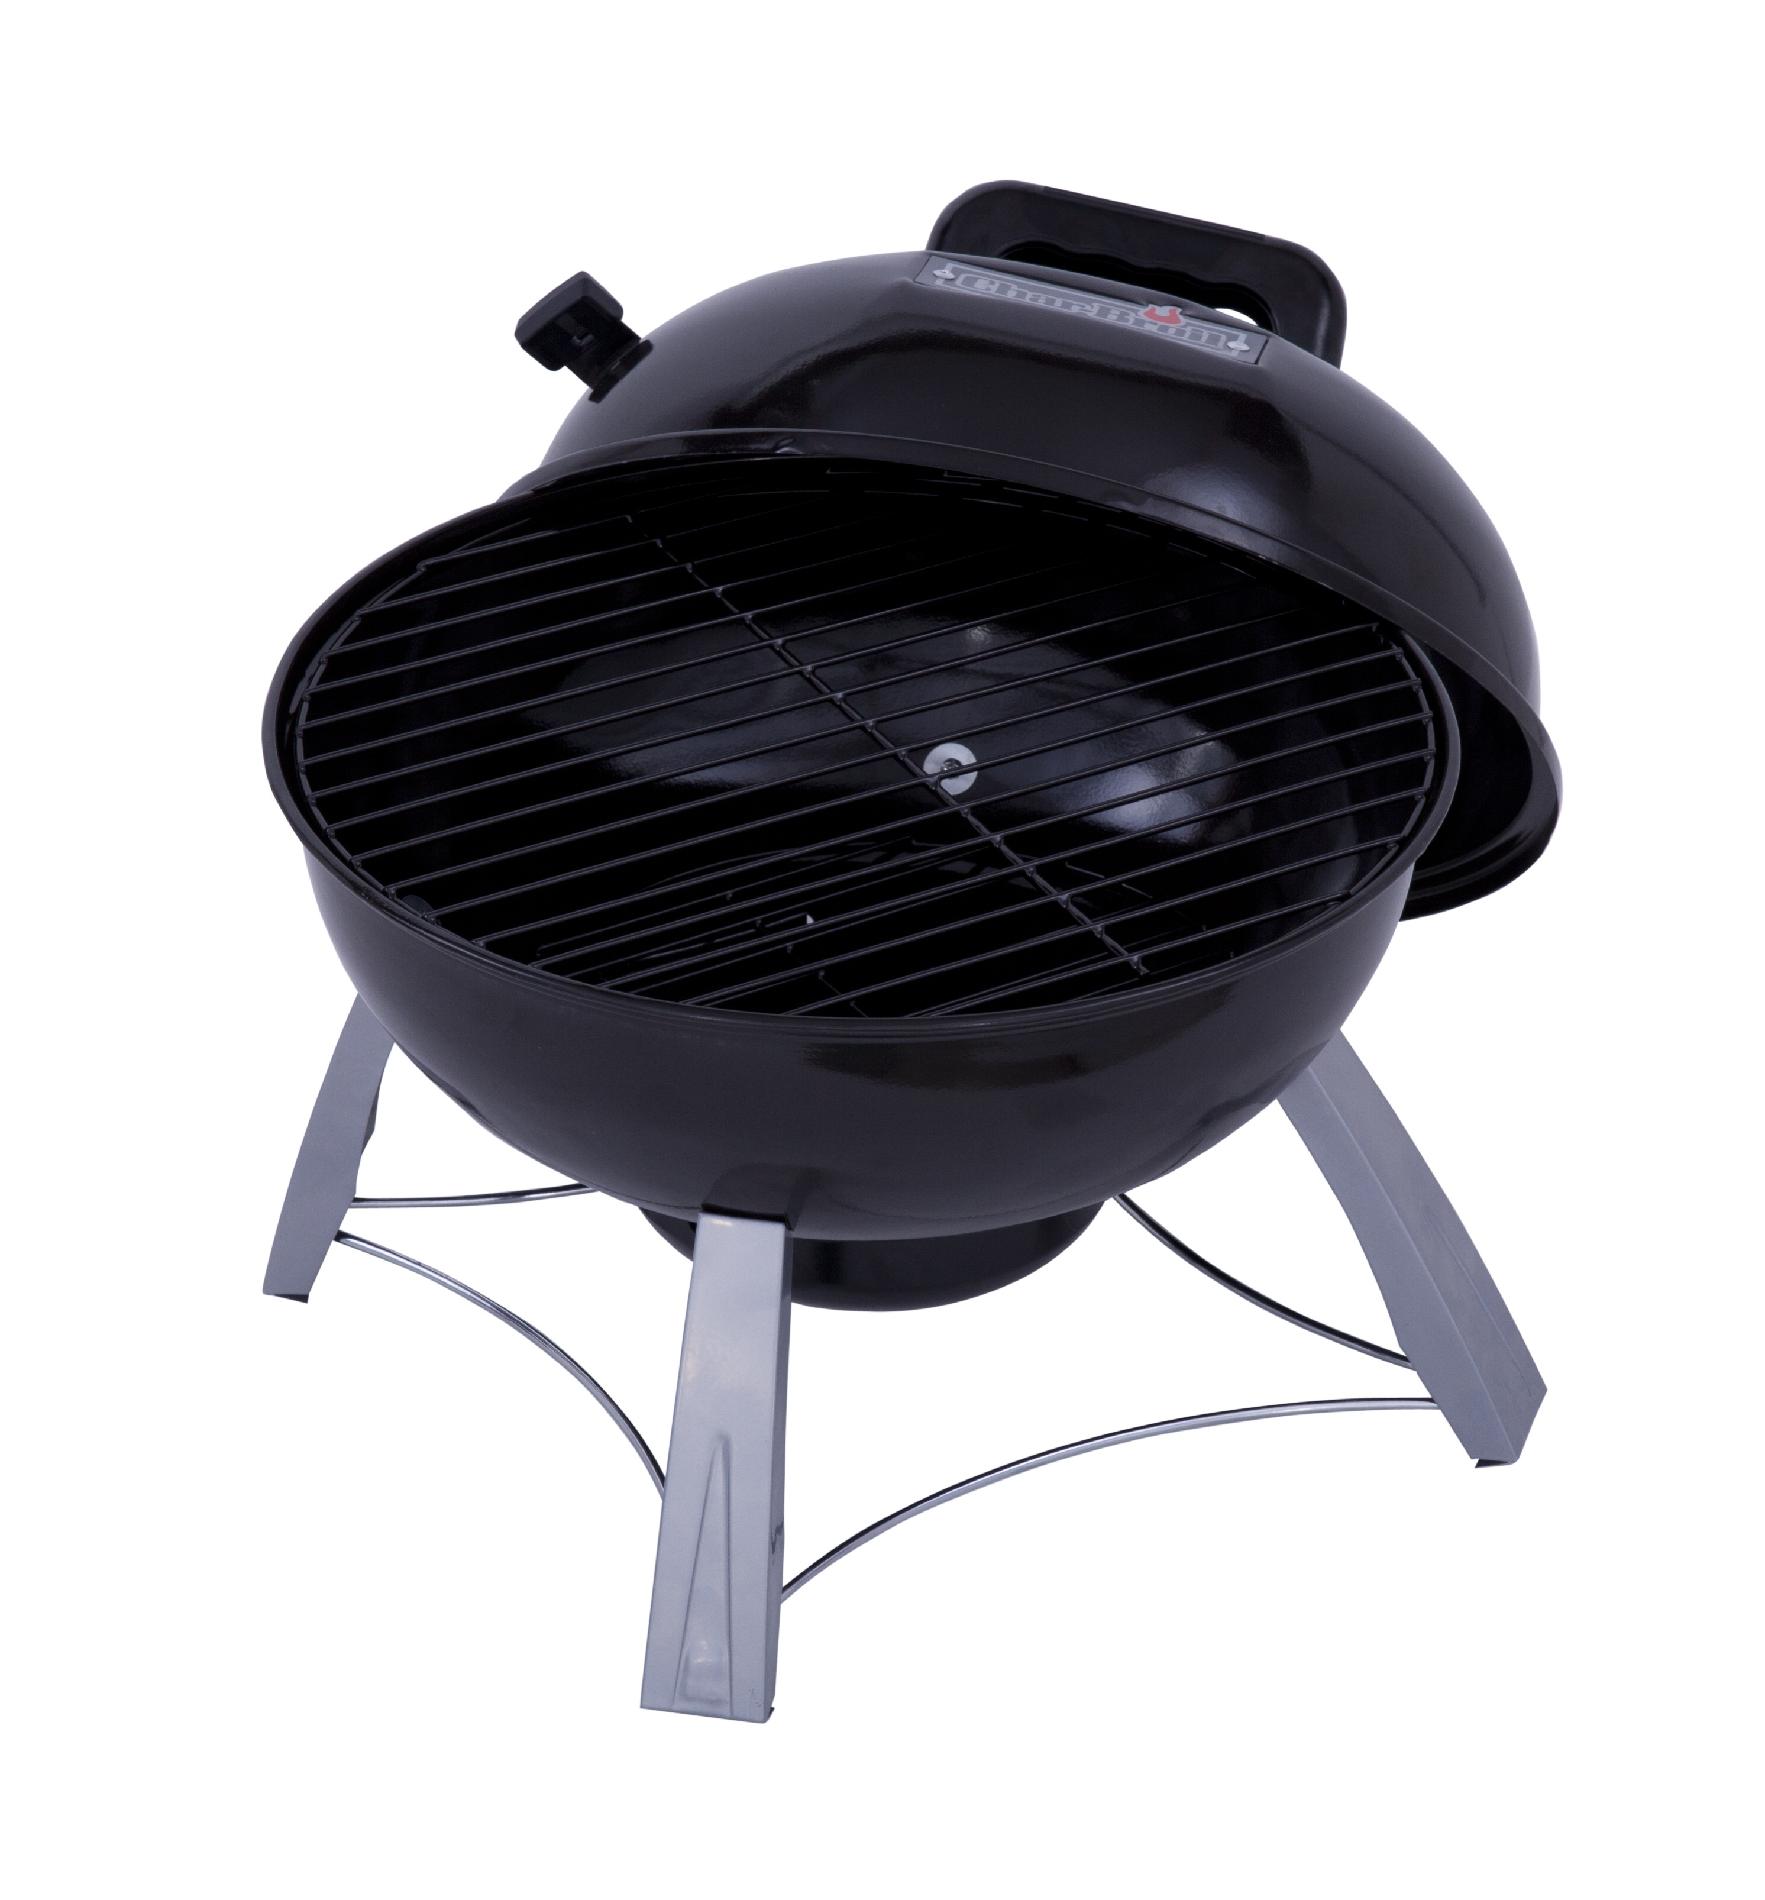 Portable Charcoal Kettle Tabletop Grill - 14" diameter